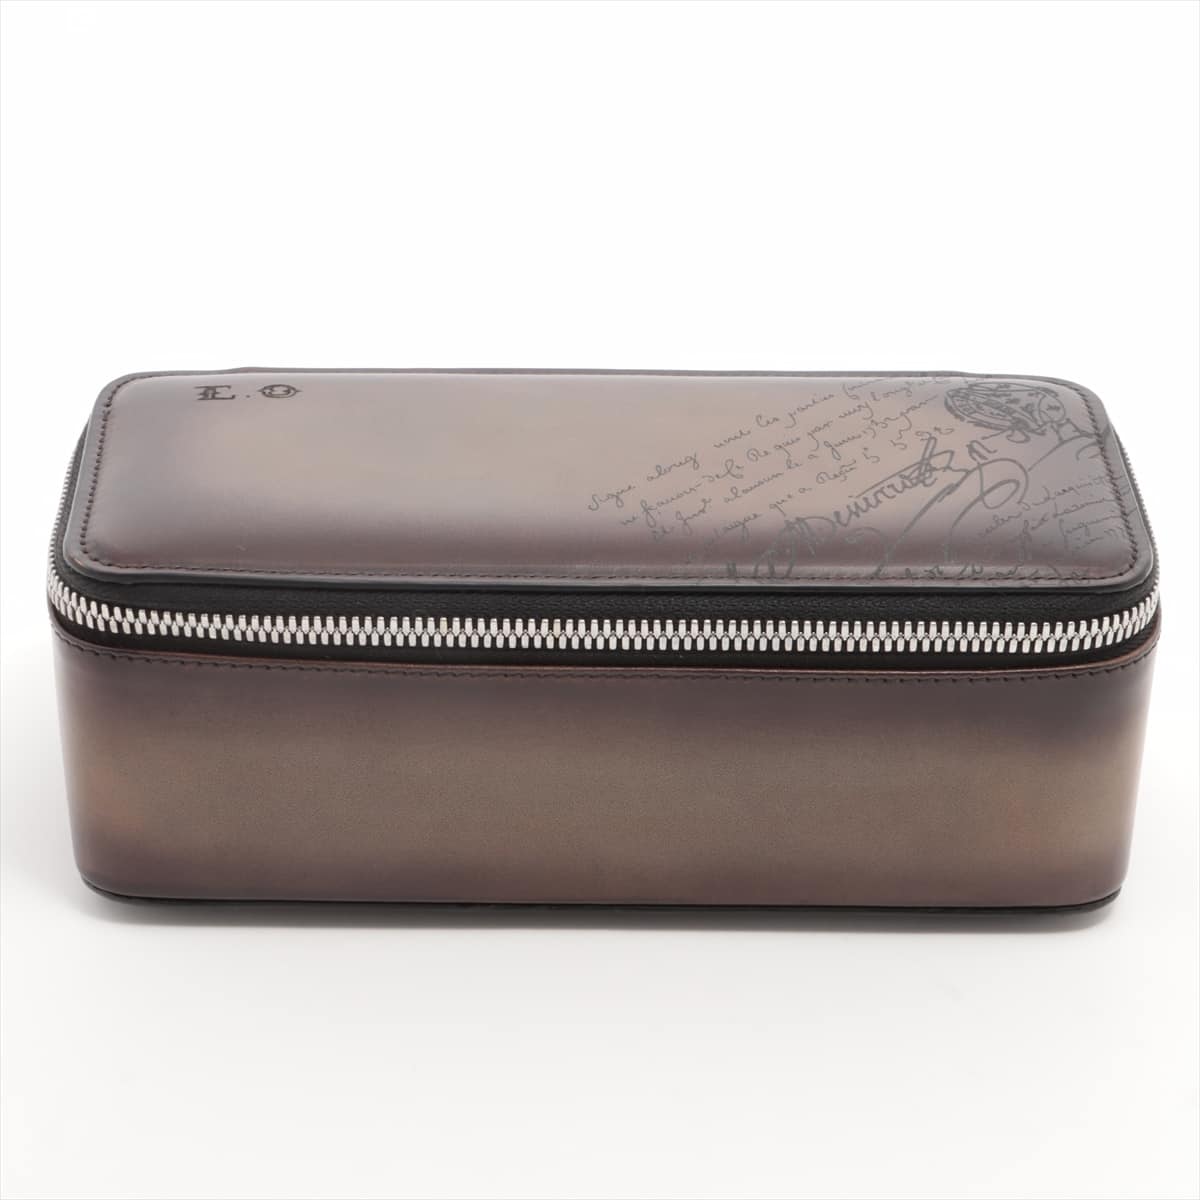 Berluti Calligraphy Watch case Leather Brown Has initials